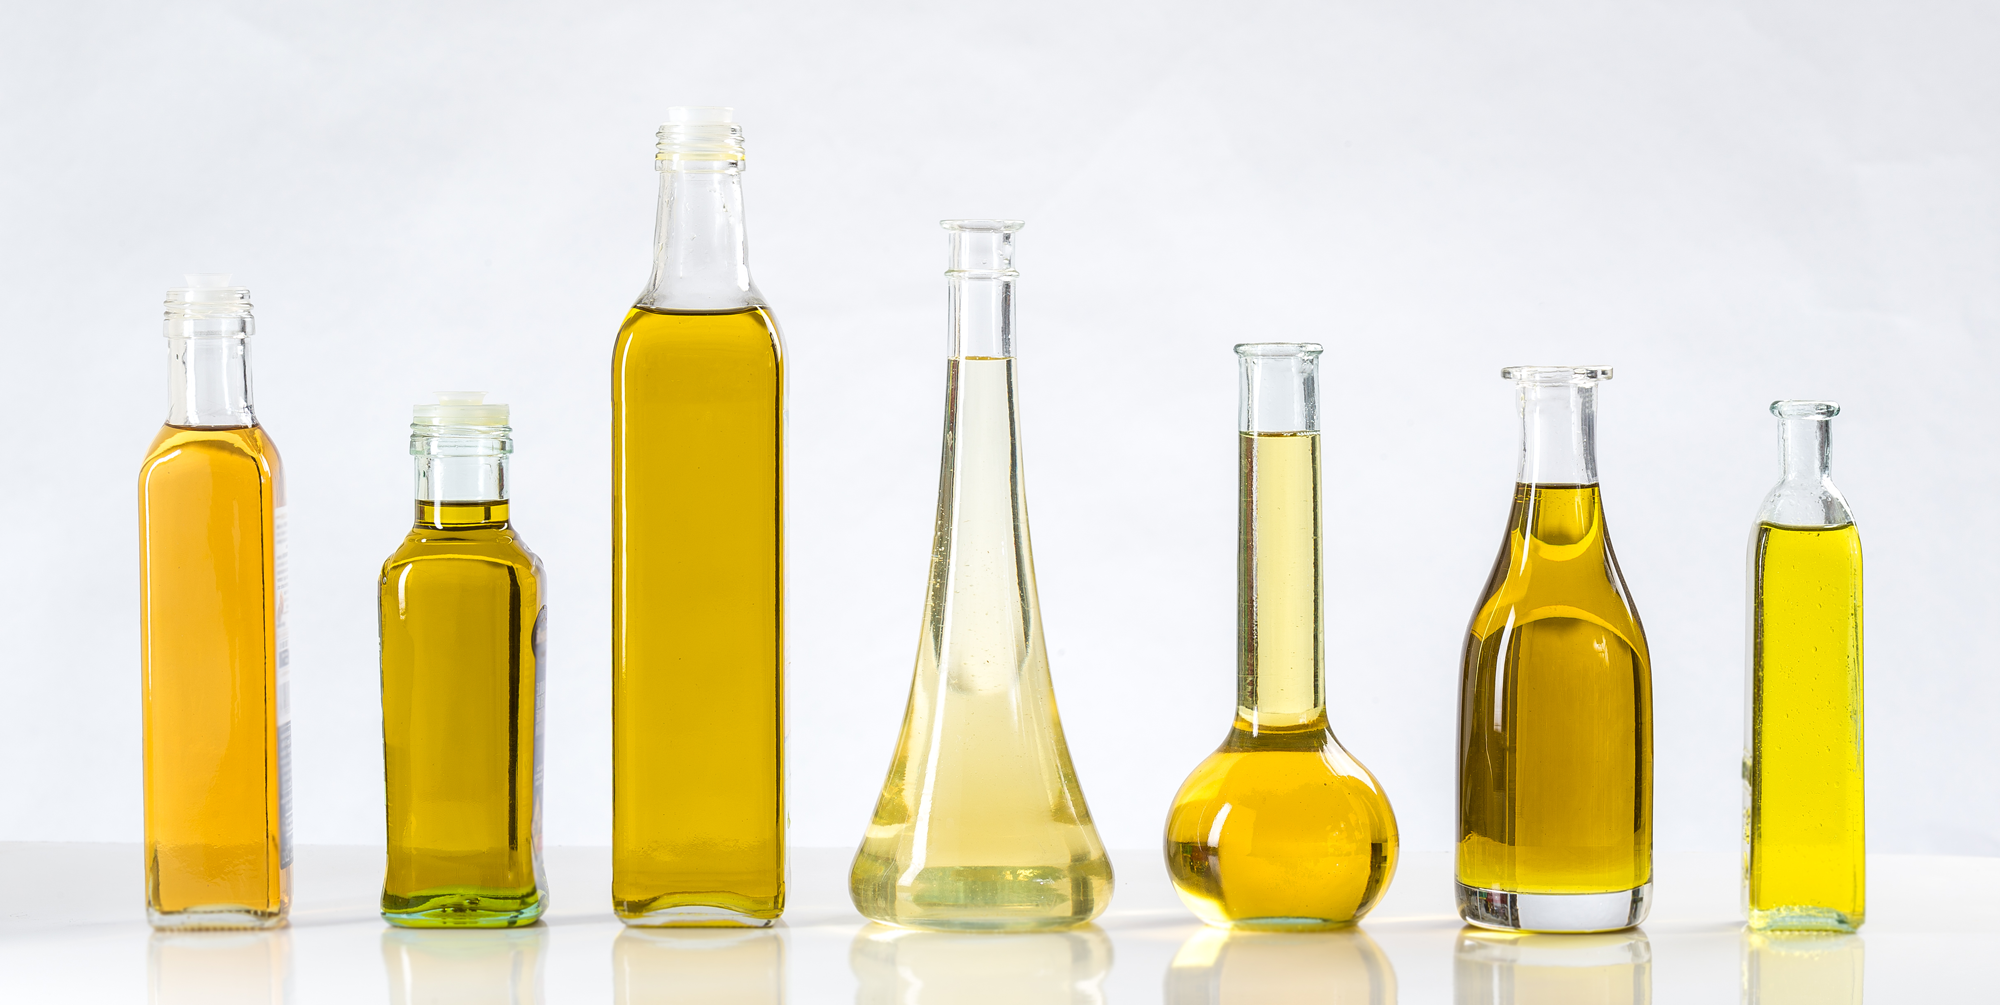 What Oils Are Used In Your Everyday Food Products?